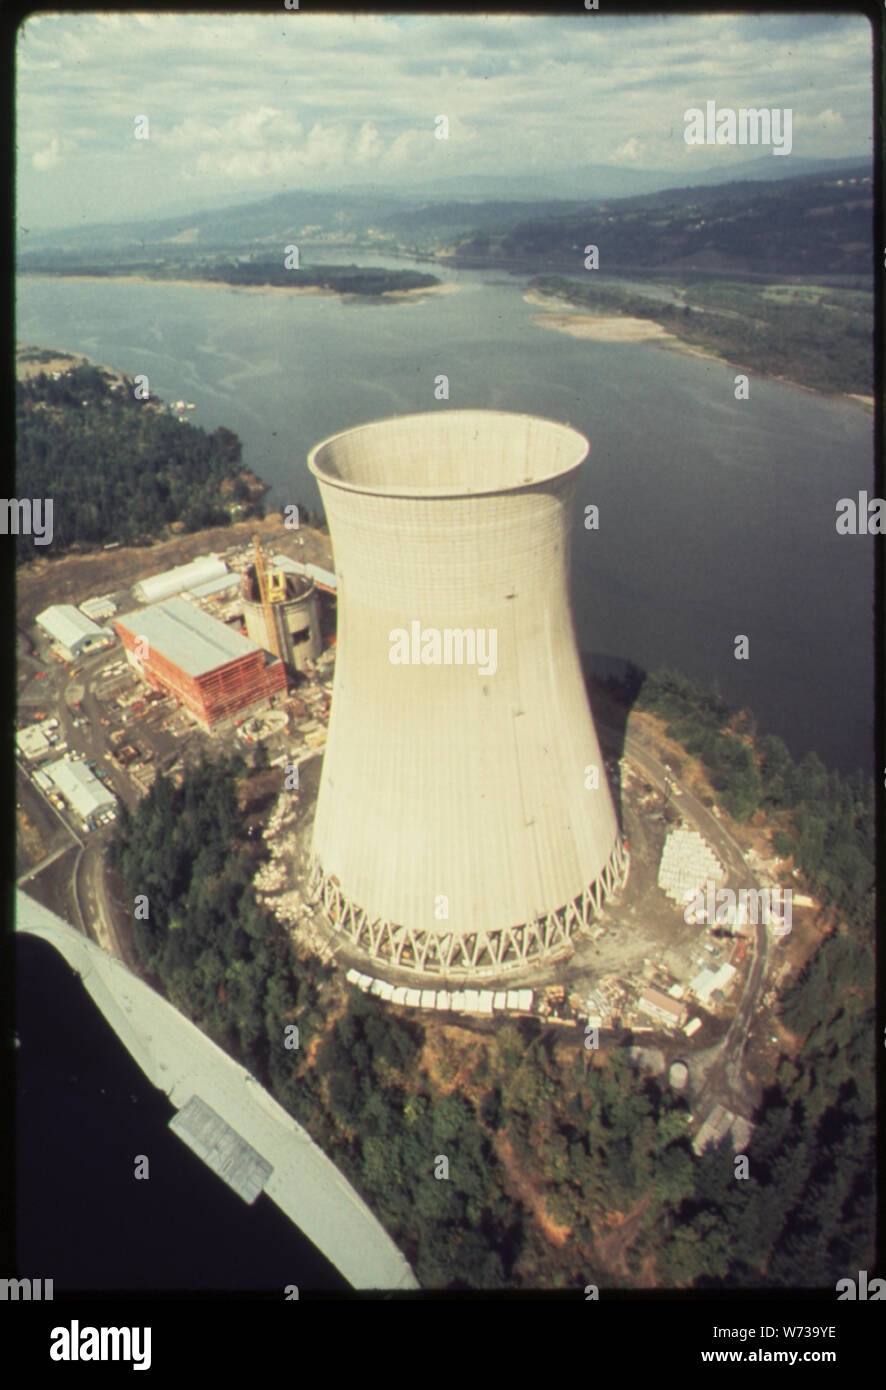 THE TROJAN NUCLEAR POWER PLANT ON THE COLUMBIA RIVER. (FROM THE SITES EXHIBITION. FOR OTHER IMAGES IN THIS ASSIGNMENT, SEE FICHE NUMBERS 42, 43, 44, 45, 46, 47.) Stock Photo